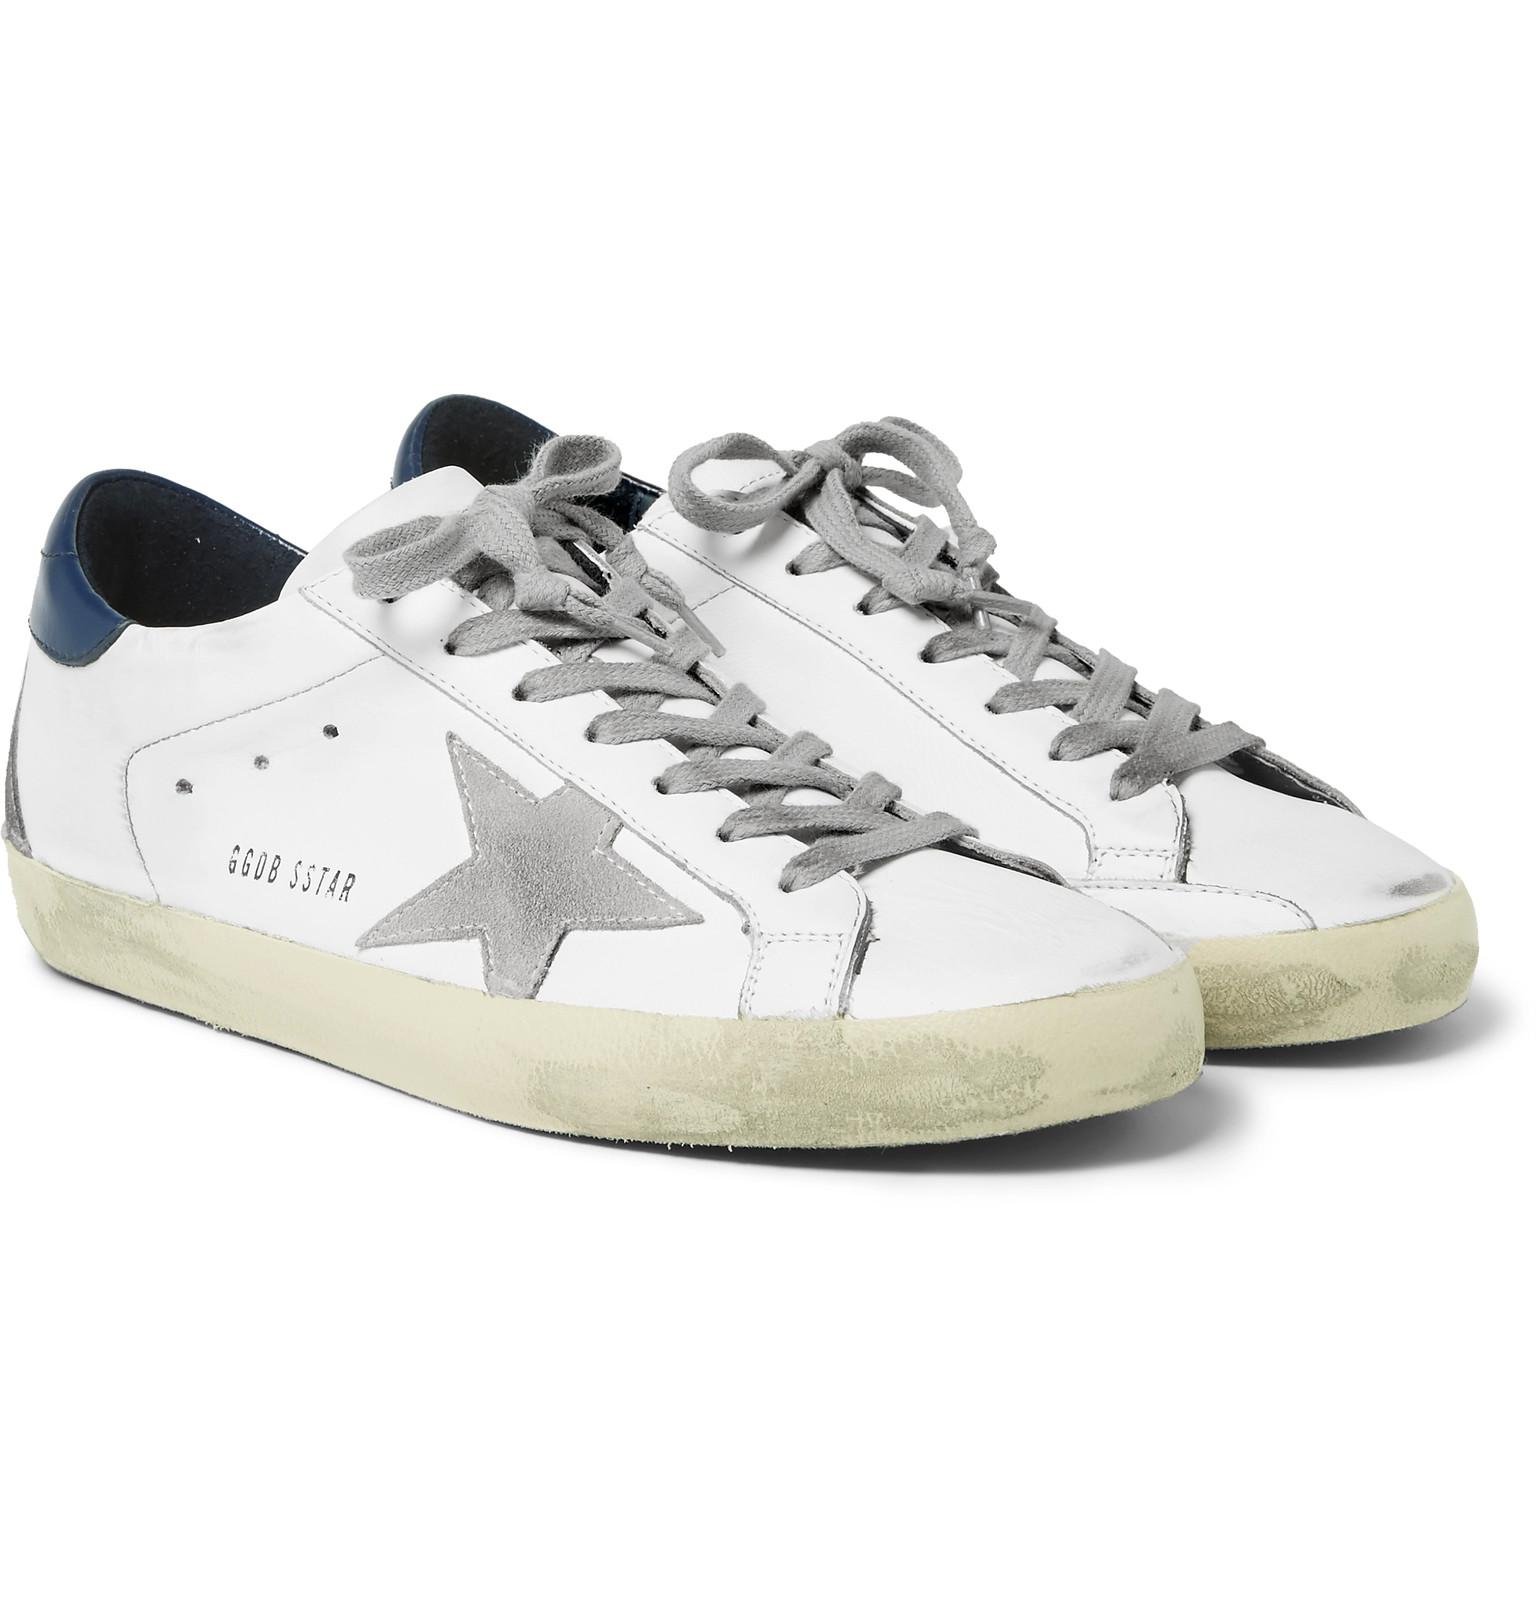 Golden Goose Deluxe Brand Superstar Distressed Suede And Leather ...